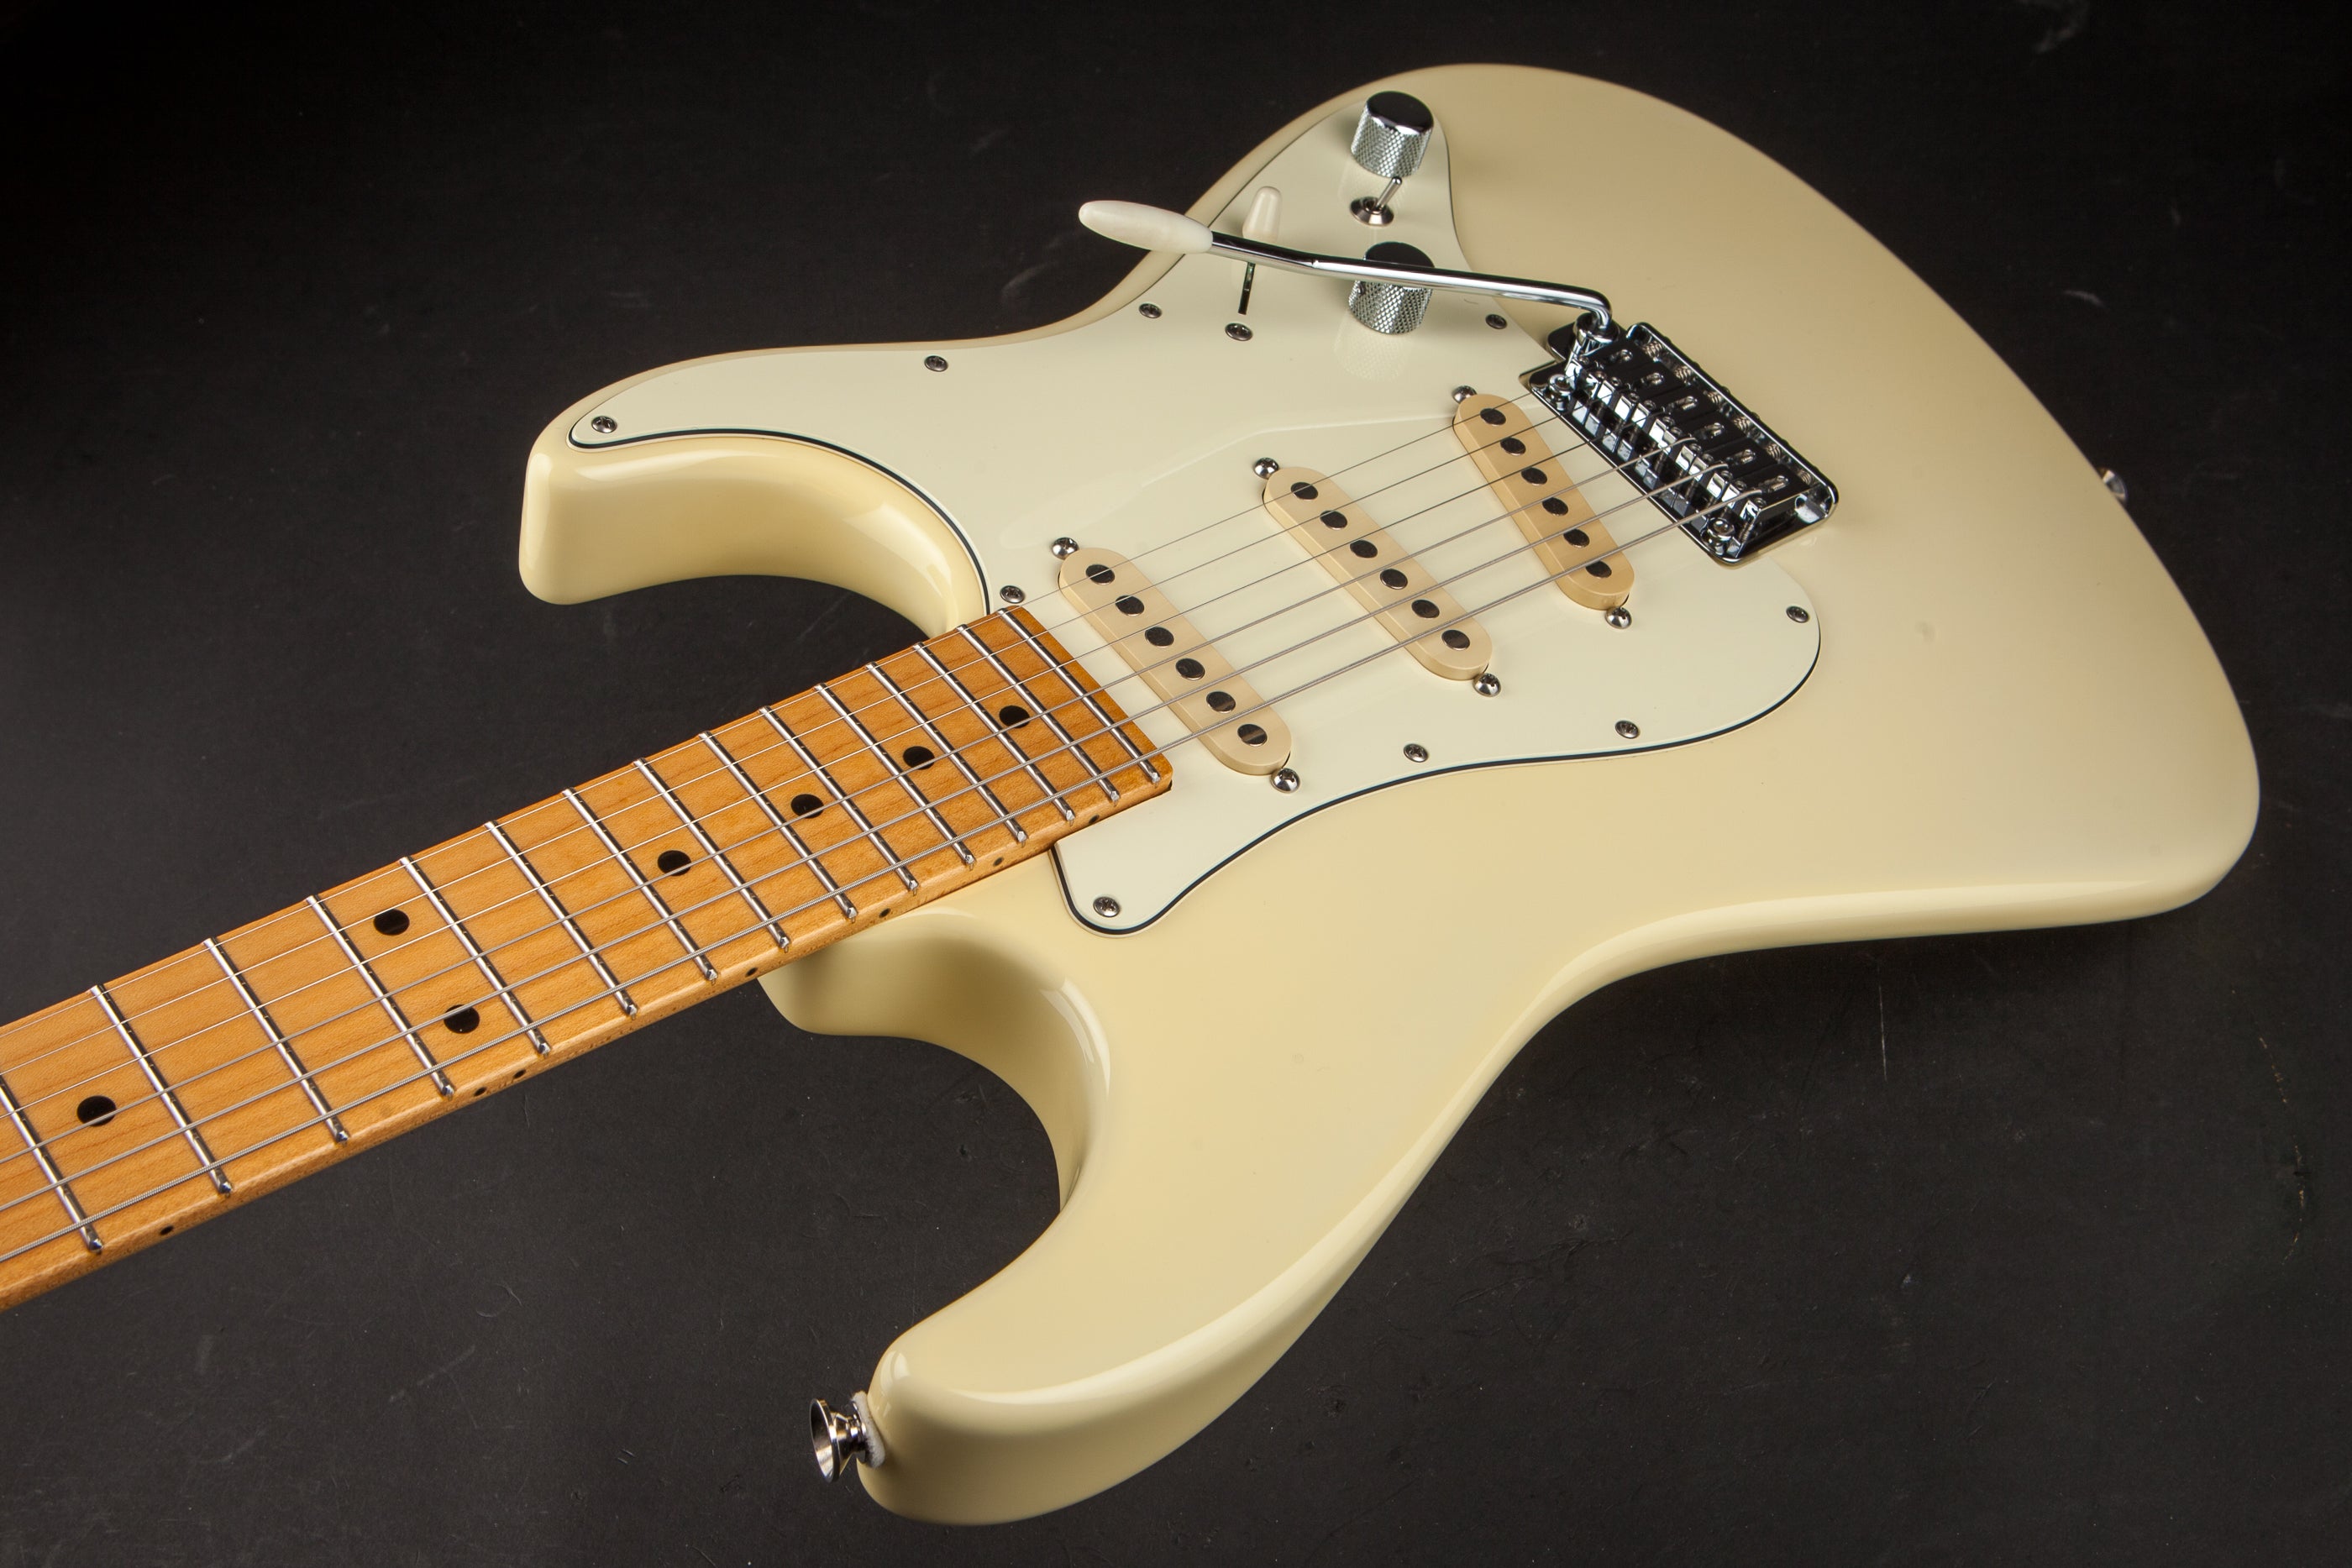 Tom Anderson: Classic Olympic White #01-11-15P